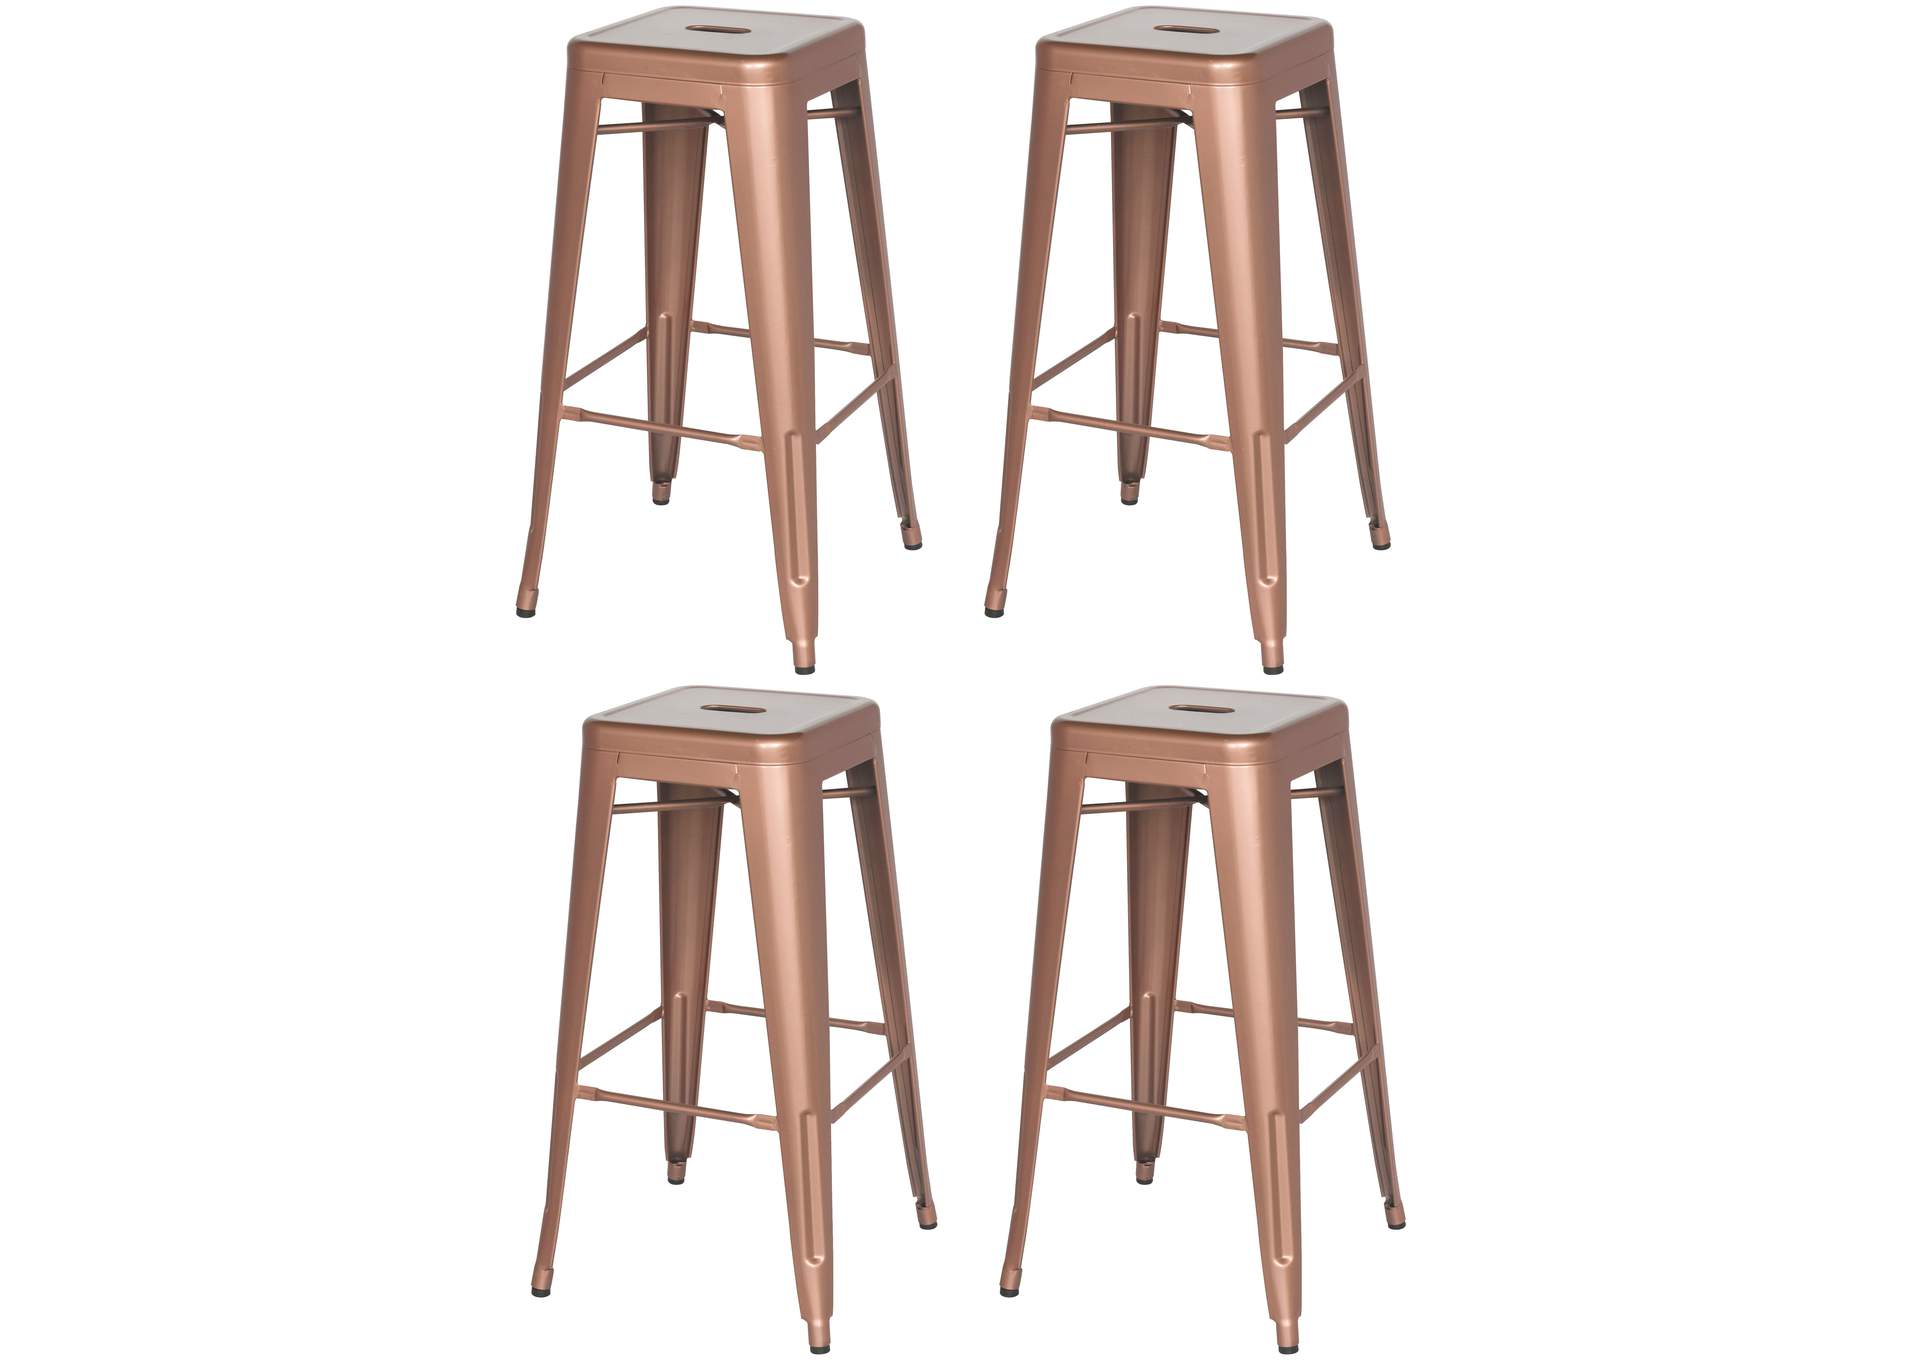 New Copper Galvanized Steel Bar Stool (Set of 4),Chintaly Imports